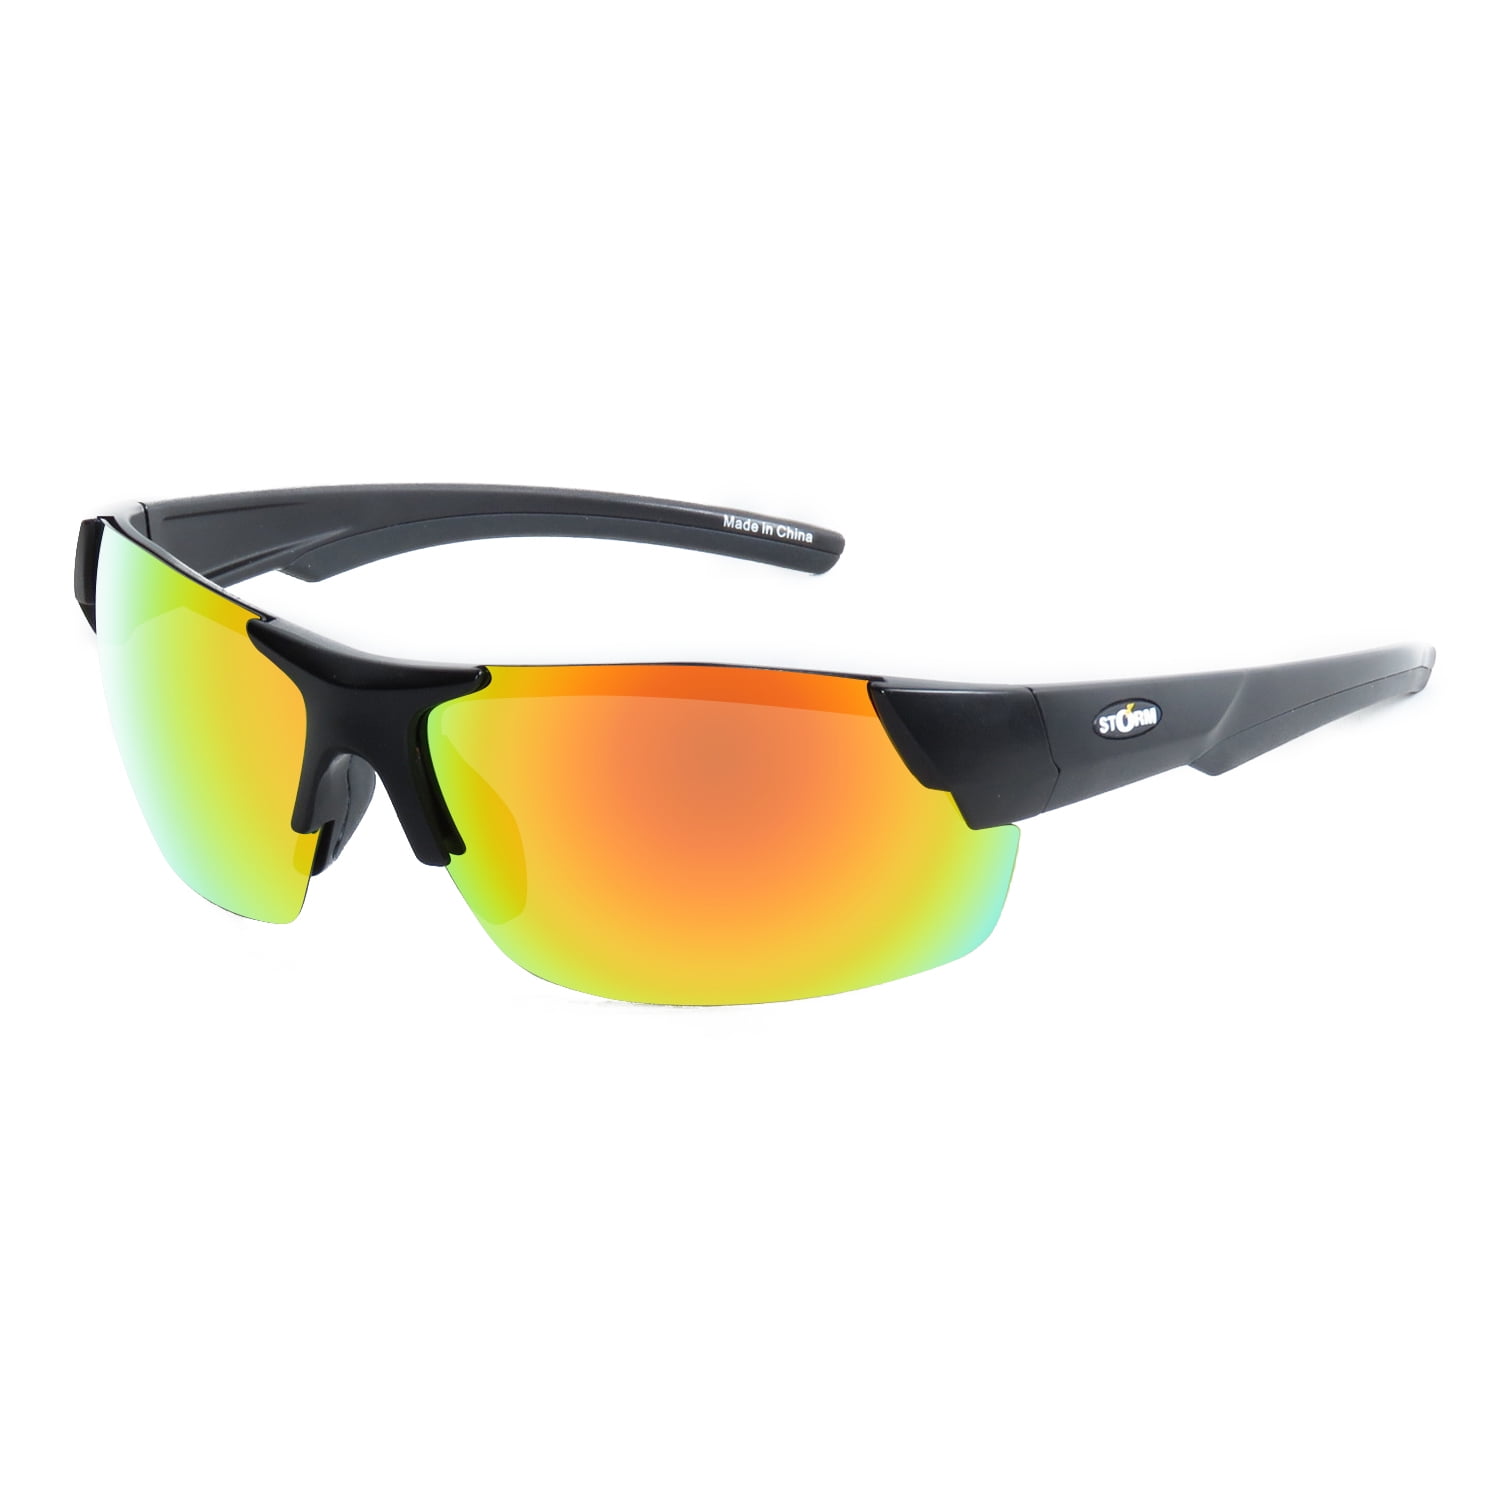 Storm Polarized Fishing Sunglasses for Men and Women - Buzz 1 Pair